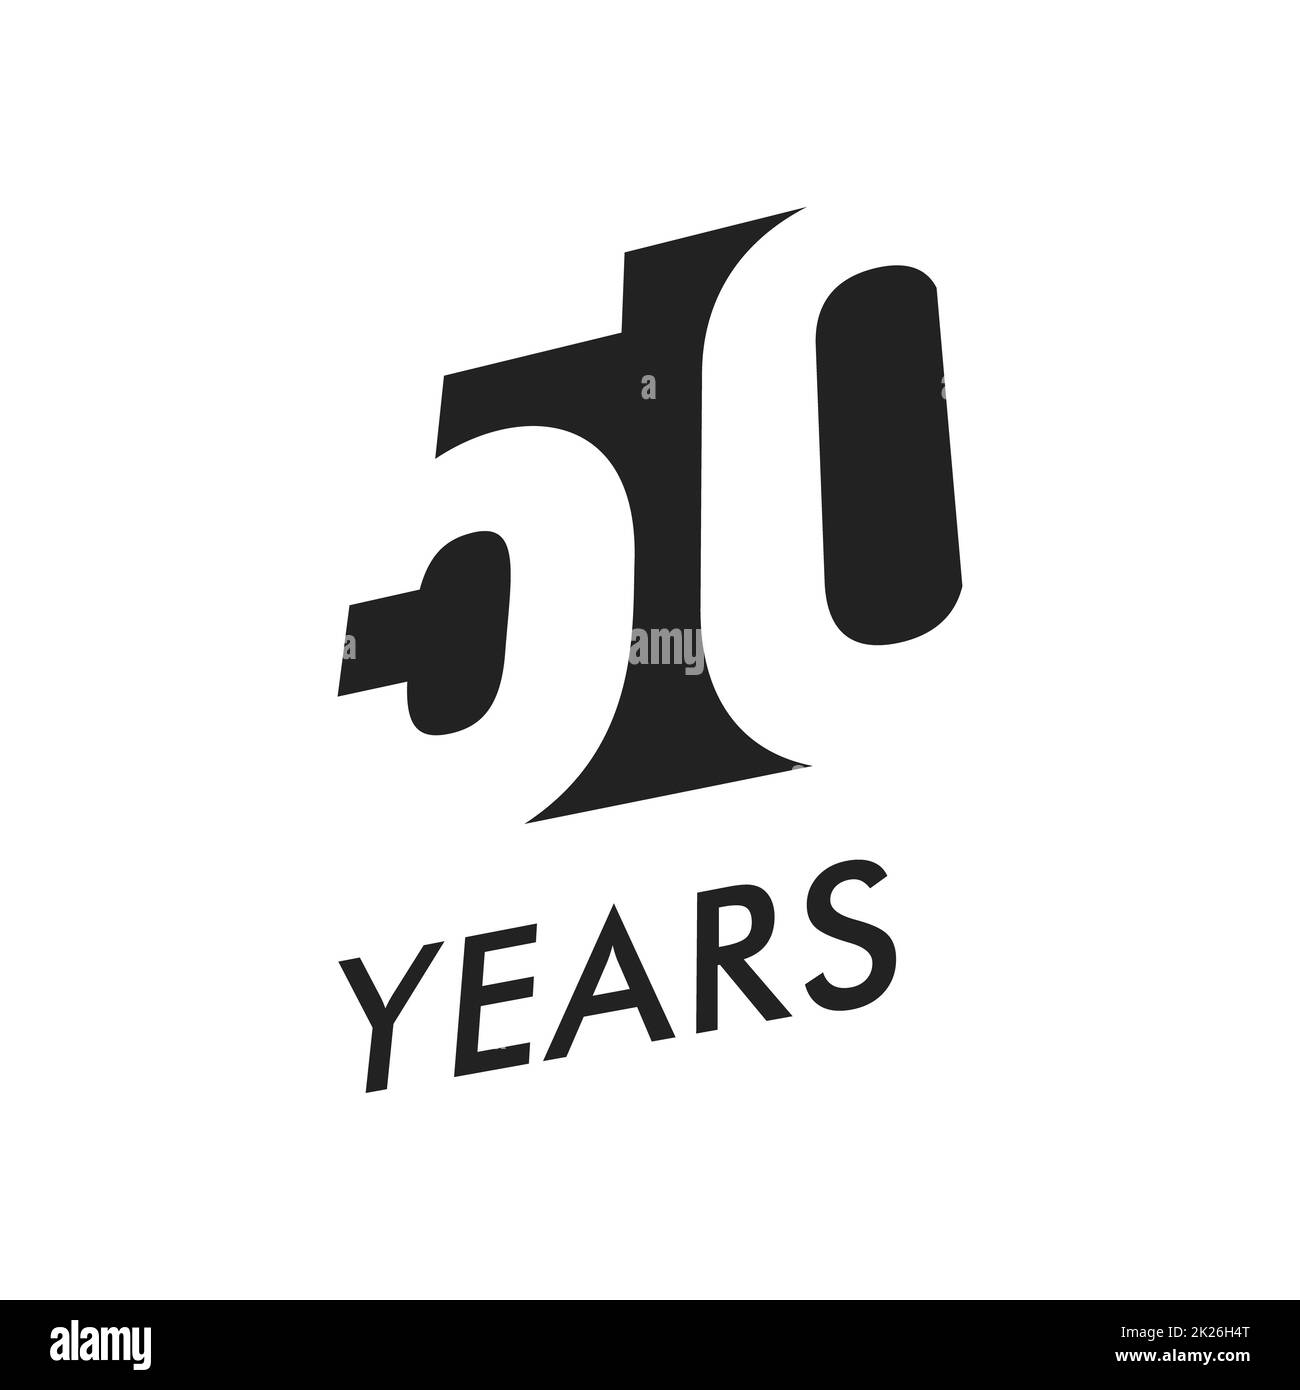 Fifty years vector emblem template. Anniversary symbol, negative space ...